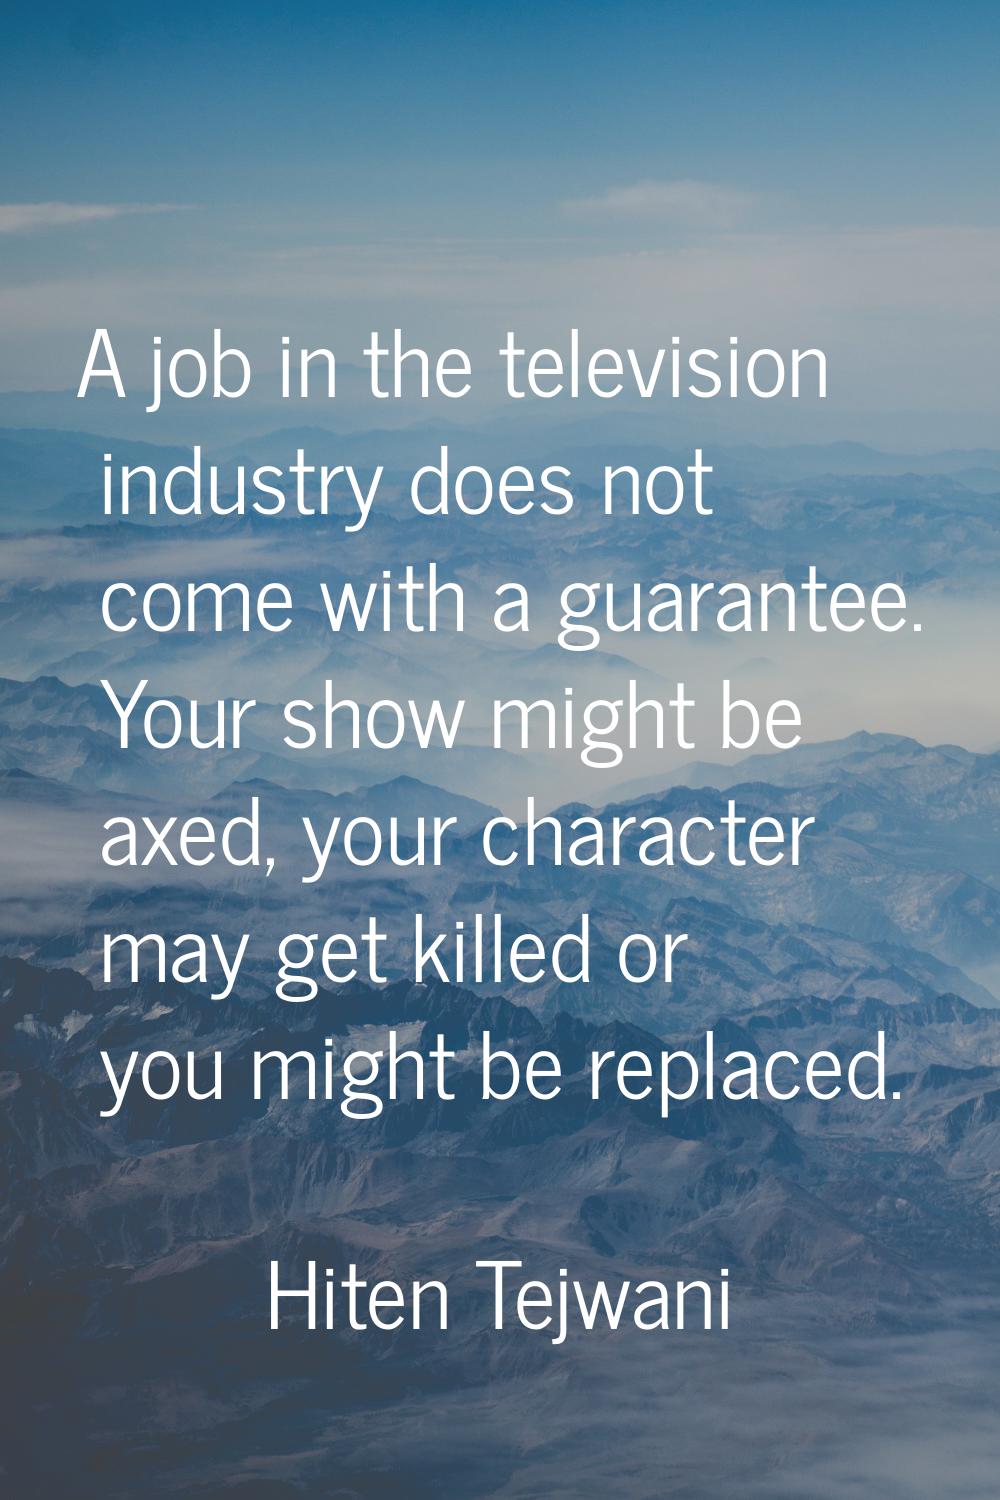 A job in the television industry does not come with a guarantee. Your show might be axed, your char